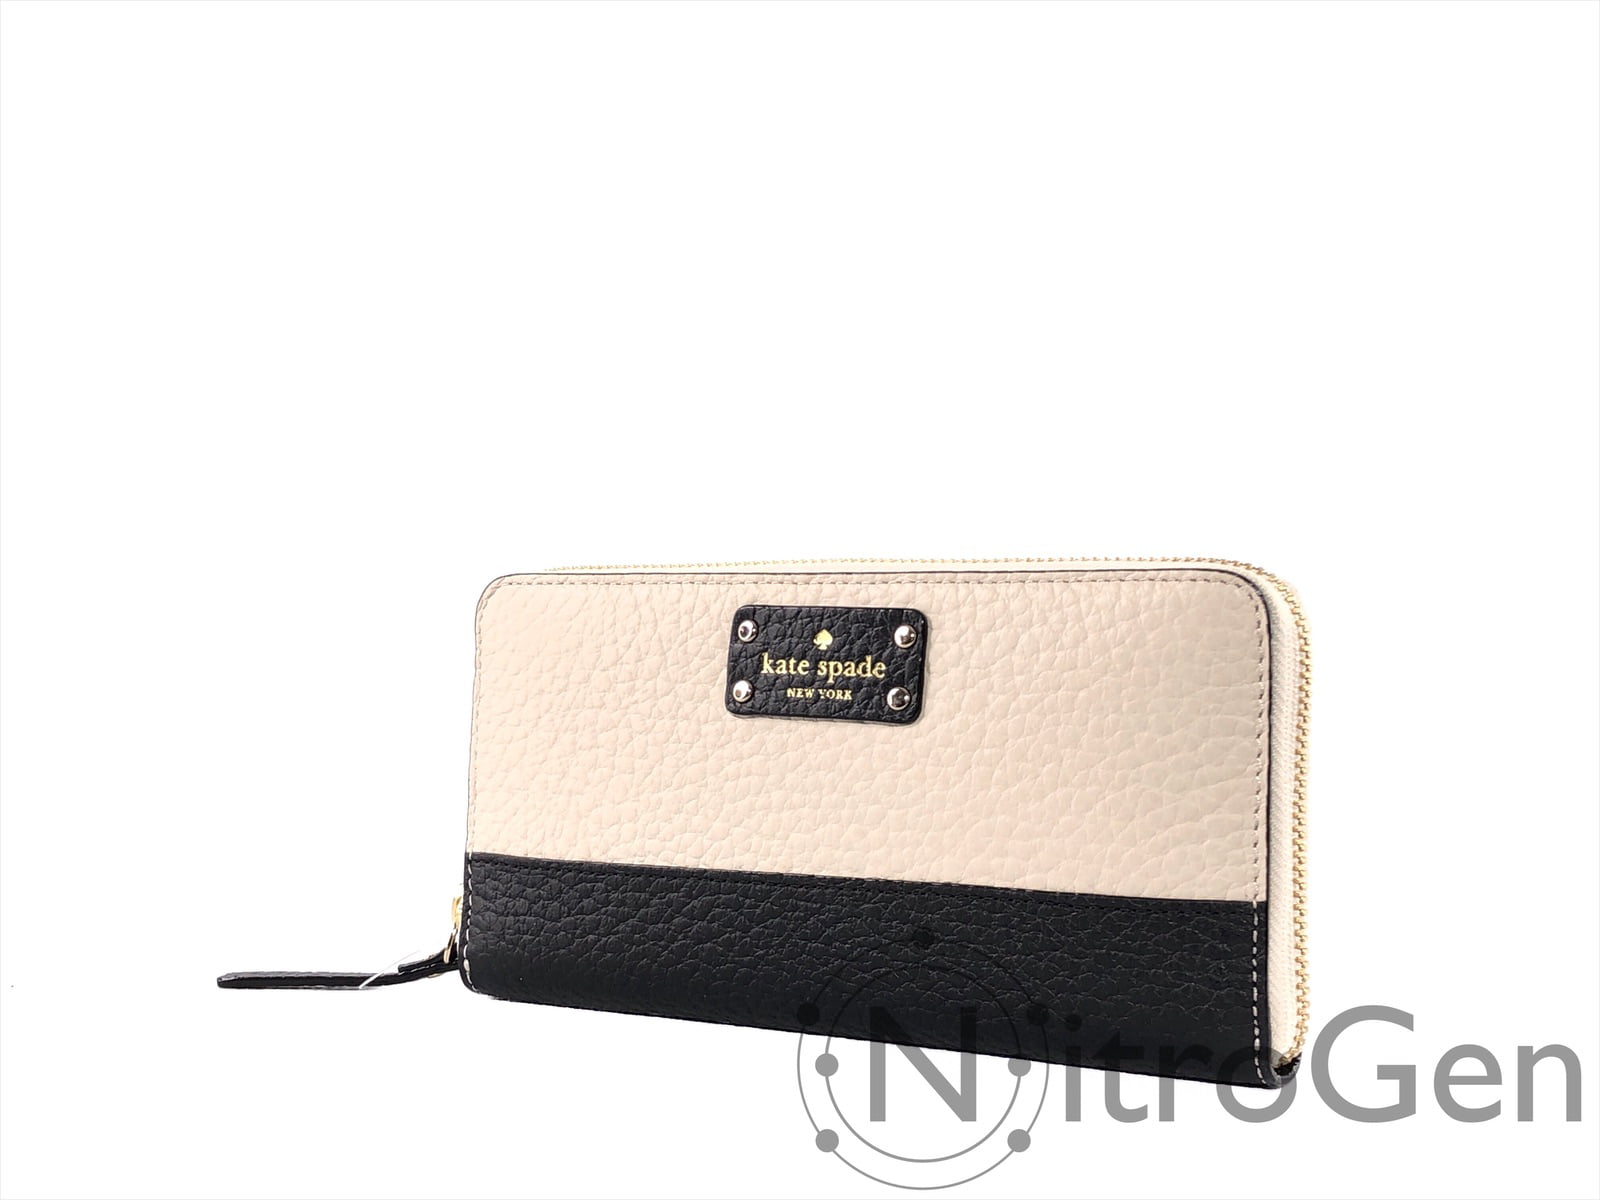 Kate Spade New York Bay Street Lacey Pebbled Leather Wallet Brand New -  